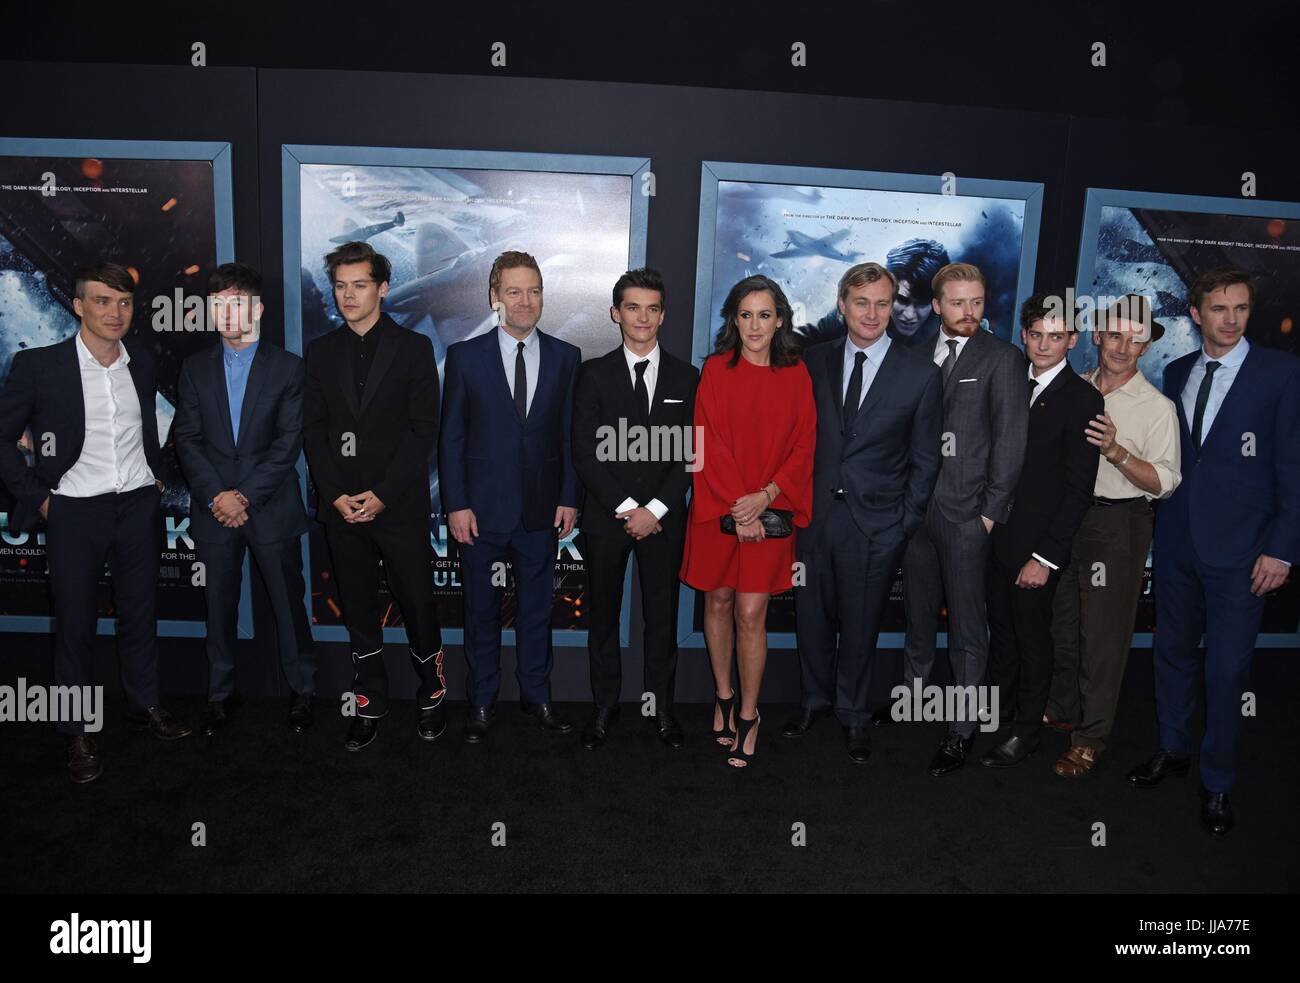 New York, NY, USA. 18 juillet, 2017. Cillian Murphy, Barry Keoghan, Harry Styles, Kenneth Branagh, Fionn Whitehead, Emma Thomas, Christpher Nolan, Jack Lowden, Aneurin Barnard, Mark Rylance, James D'Arcy au niveau des arrivées pour Dunkerque Premiere, AMC Loews Lincoln Square 13, New York, NY 18 juillet 2017. Credit : Derek Storm/Everett Collection/Alamy Live News Banque D'Images